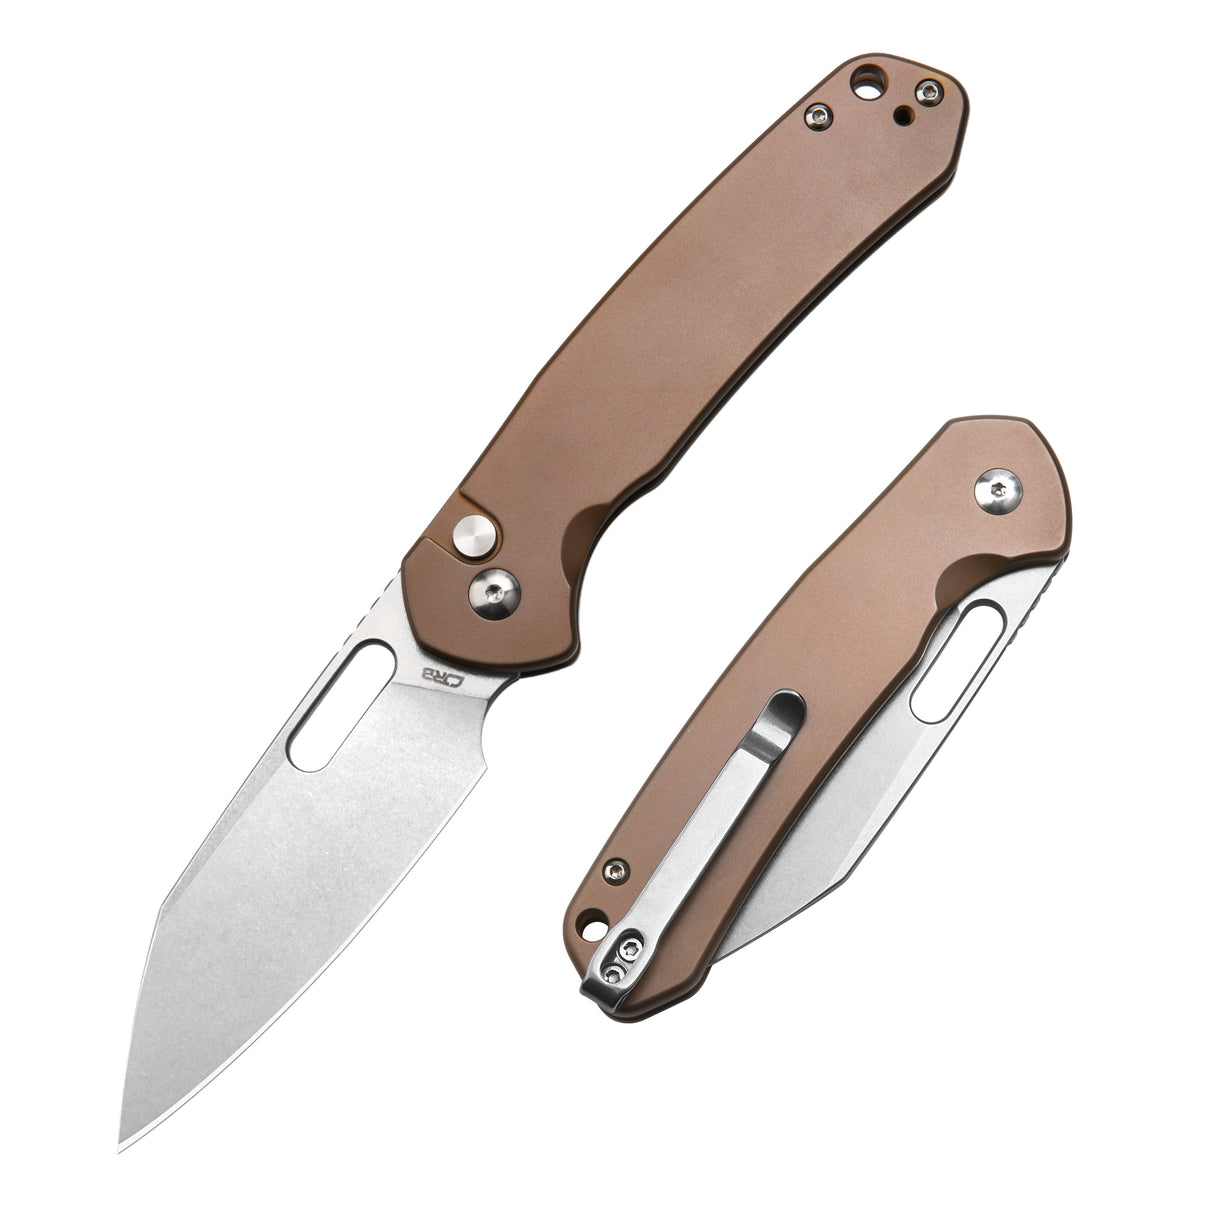 CJRB Pyrite Wharncliffe J1925A AR-RPM9 Steel Blade Steel Handle Folding Knives Copper Steel Color